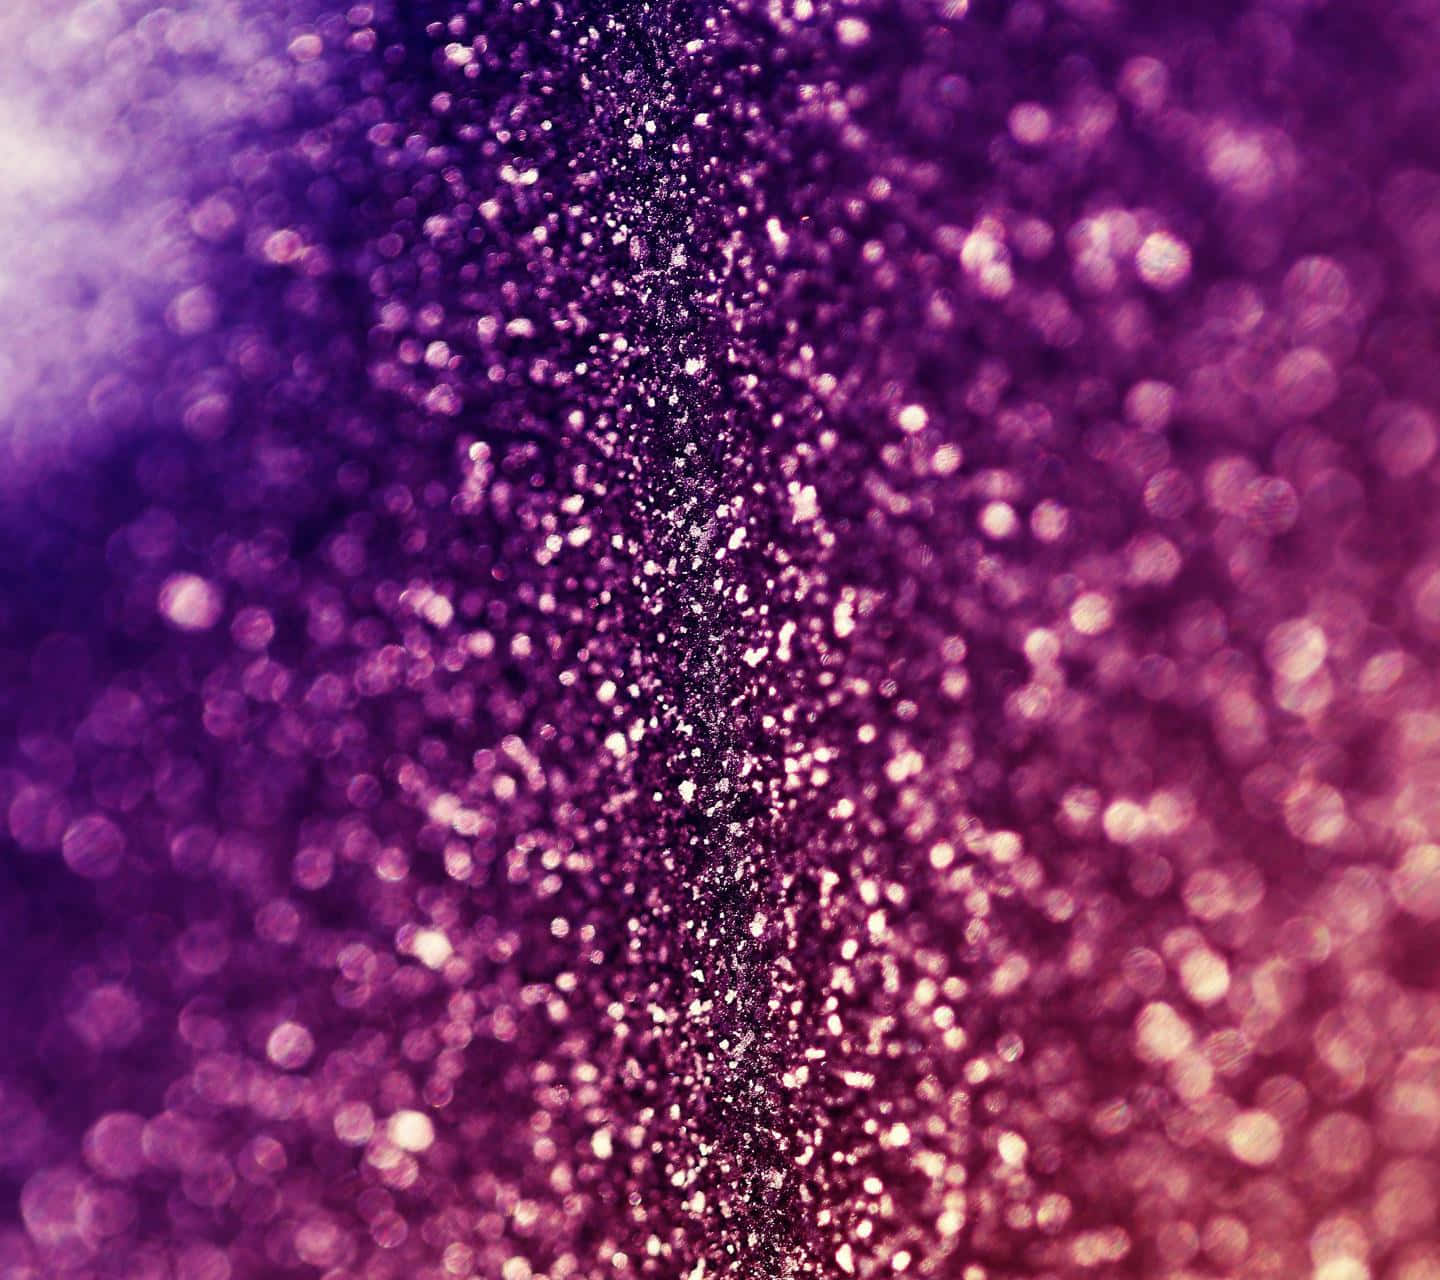 A breathtaking sparkly background to give any scene an extra special ambiance.